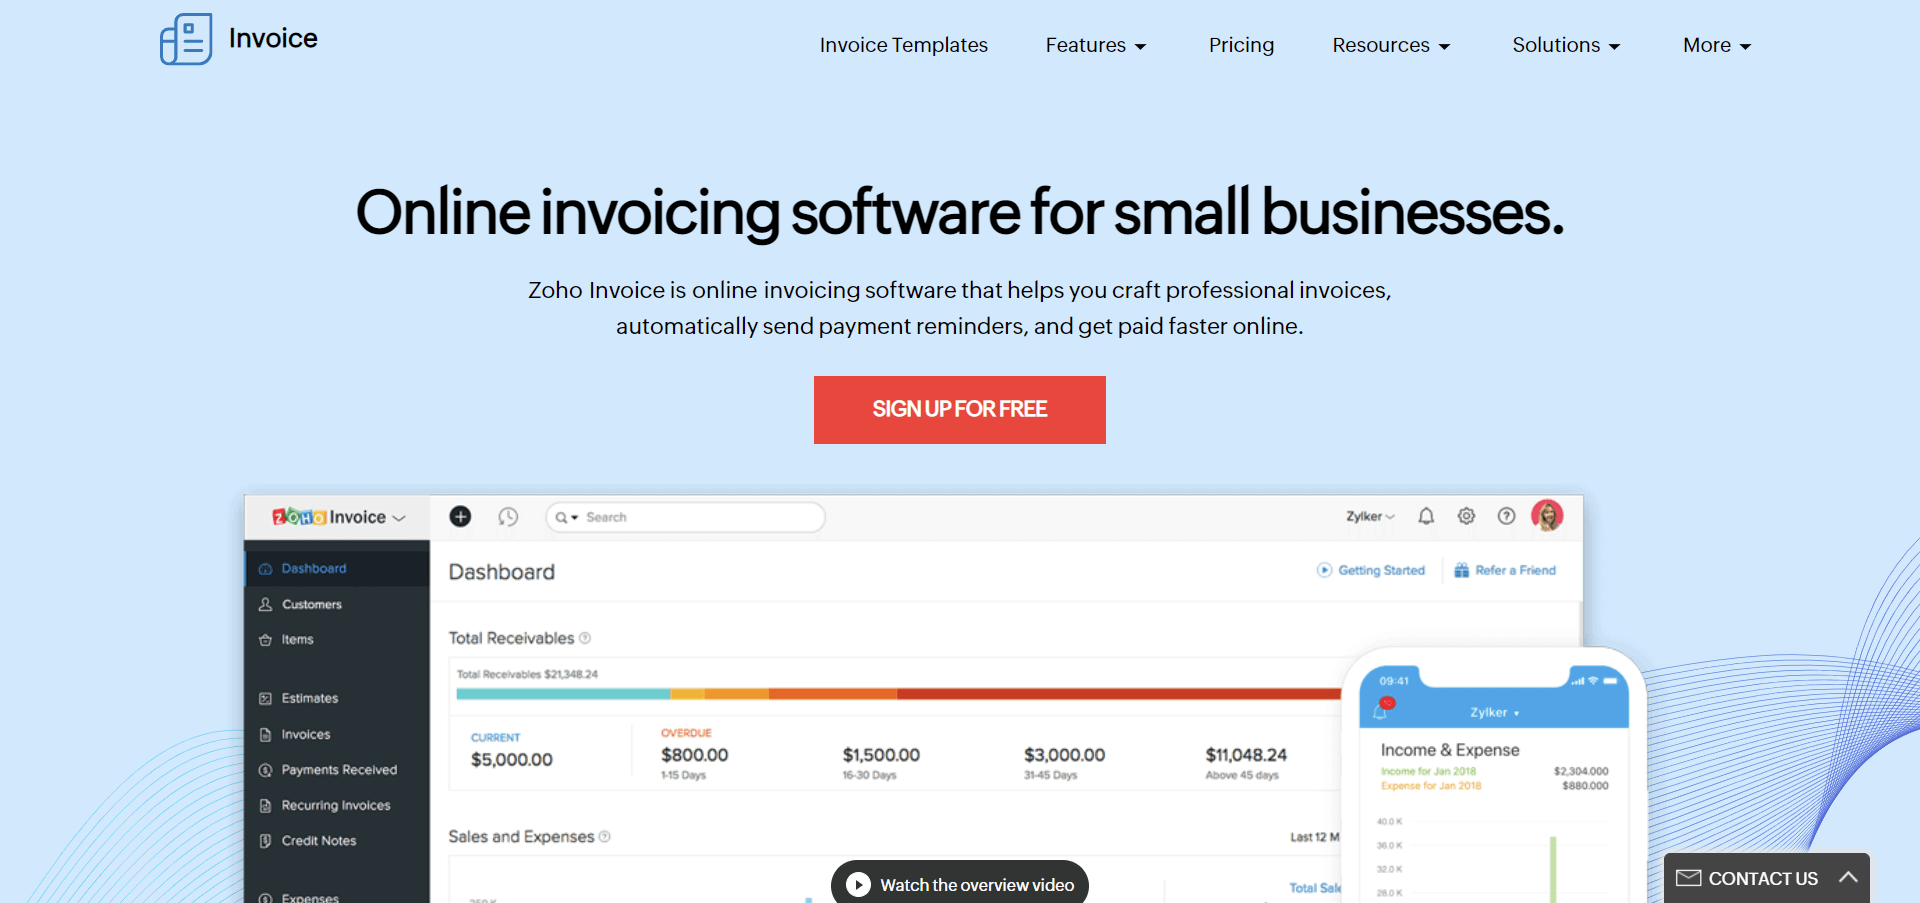 invoicing software, best invoice apps, free invoice apps, best free invoice apps, invoice creator app, invoice app for iPhone, invoice maker app, invoice app for Android, online invoice app